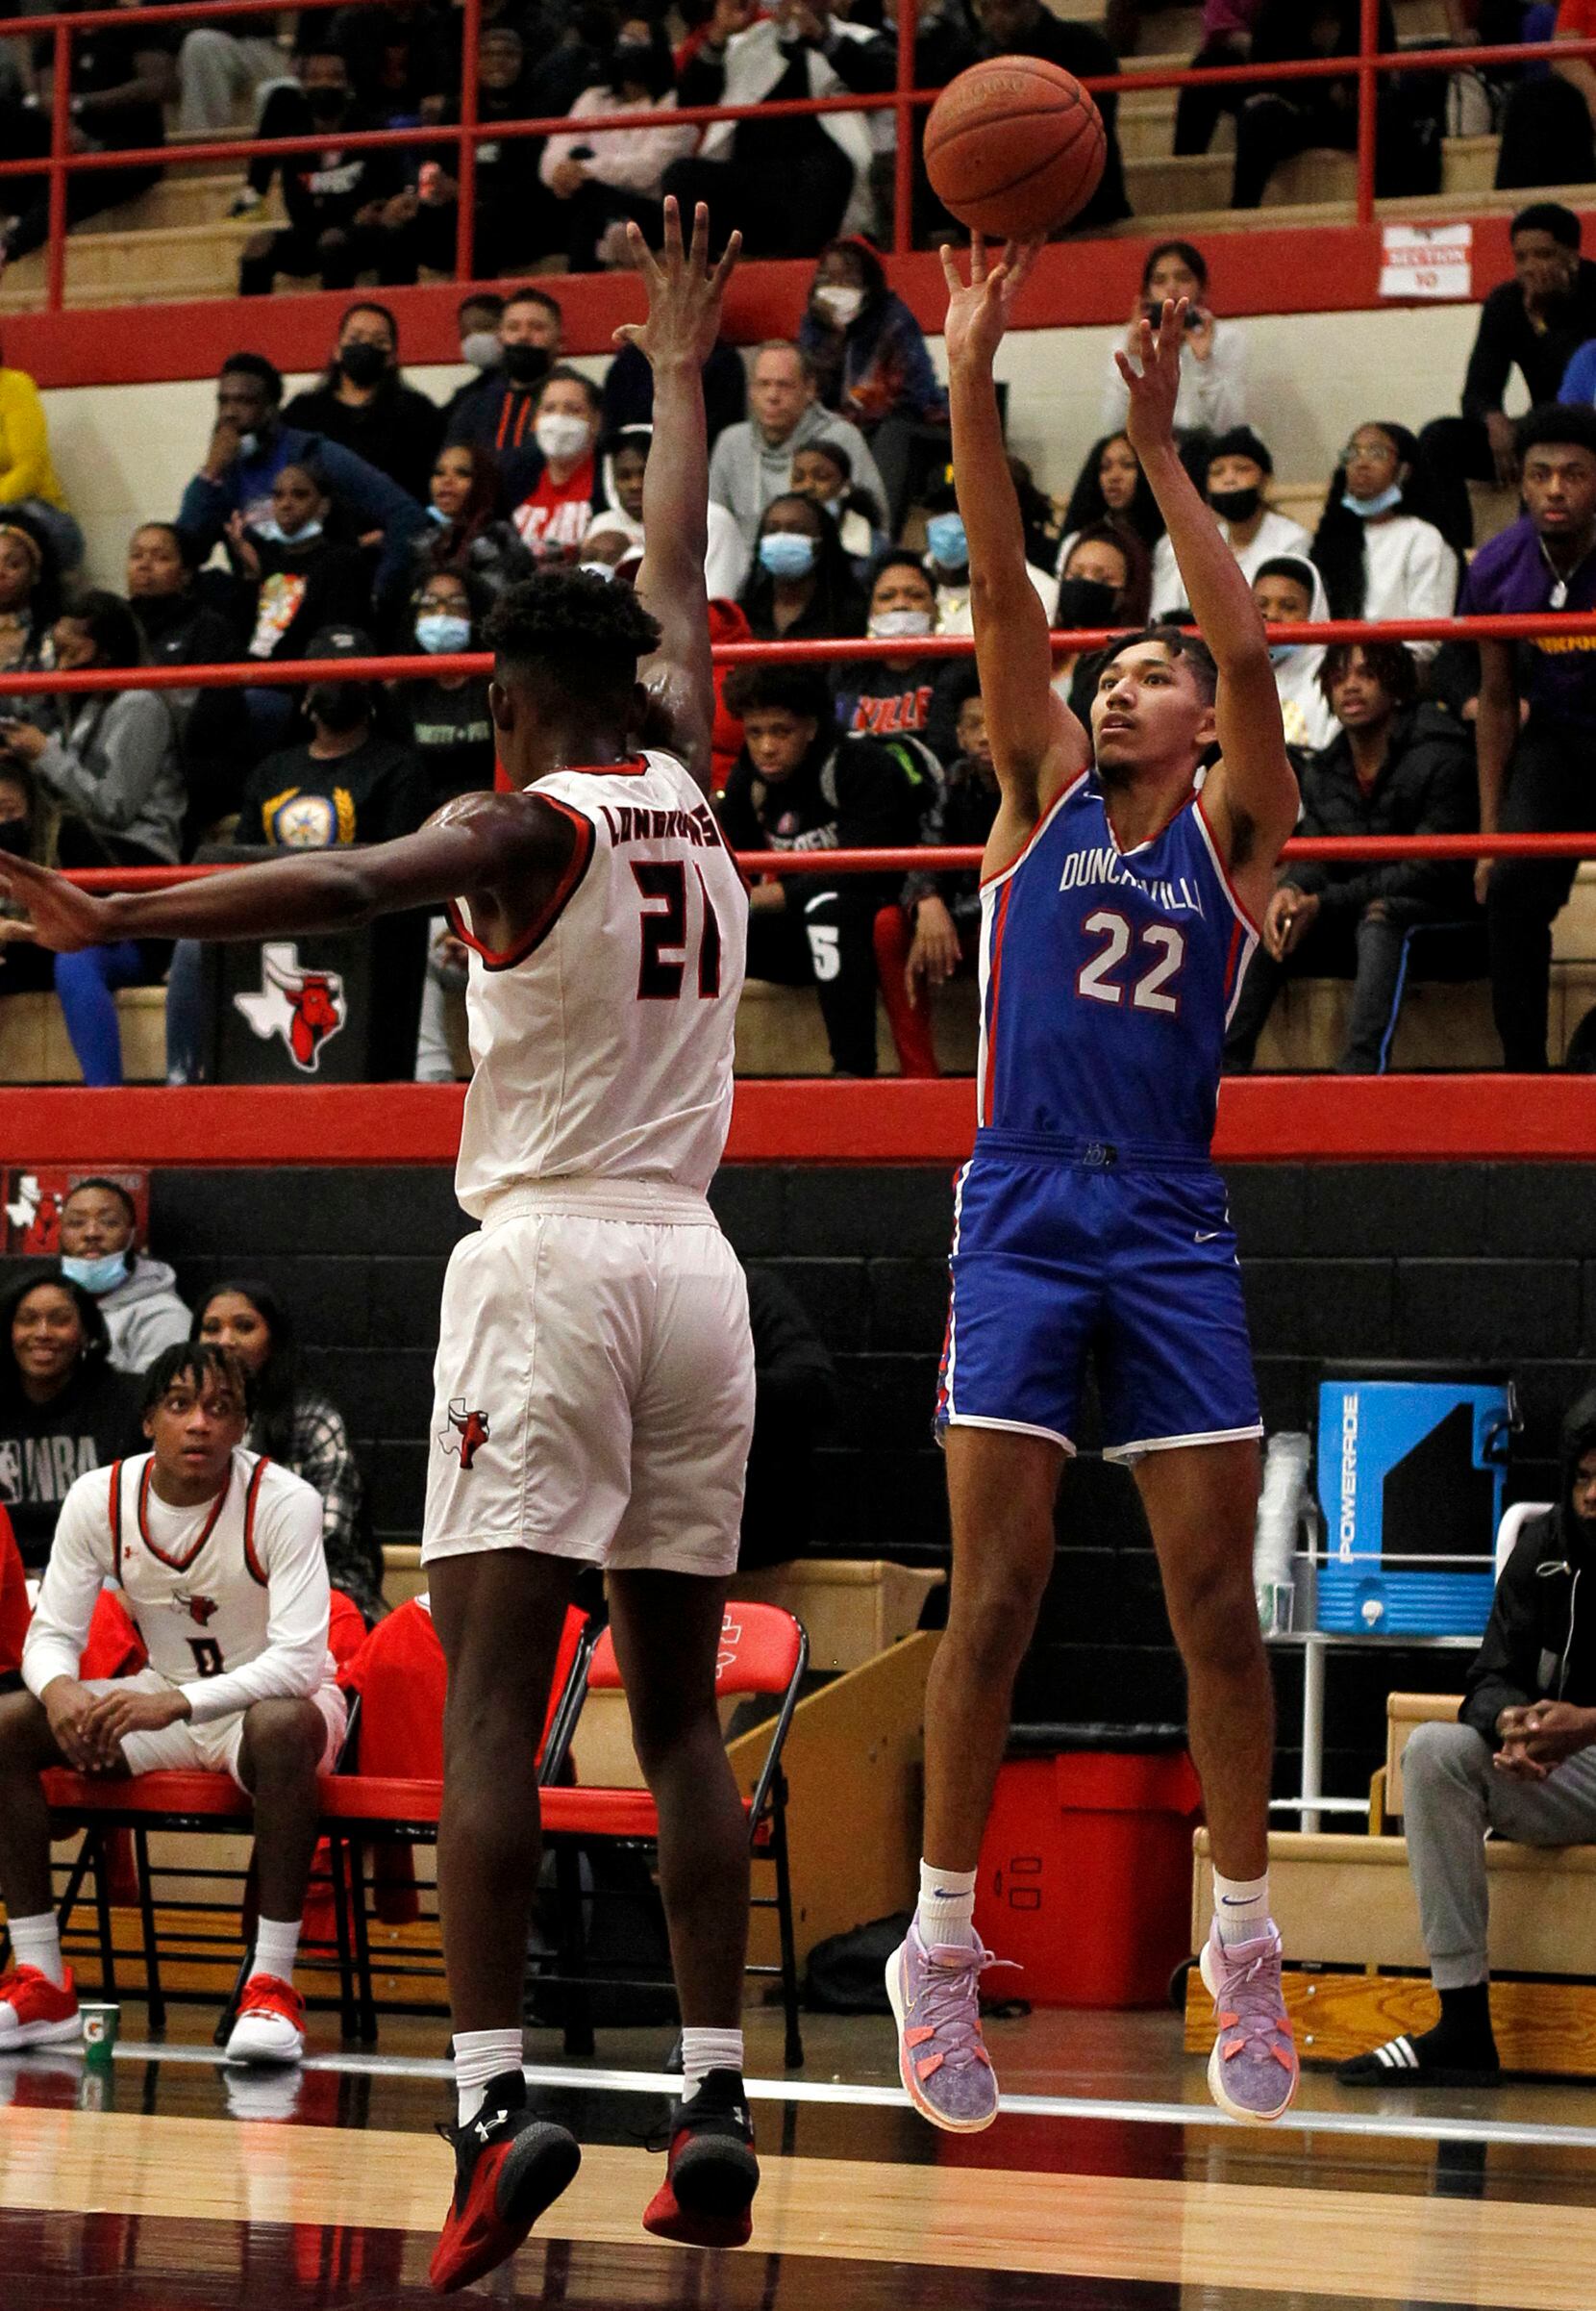 Duncanville guard Davion Sykes (22) shoots a jump shot over the defense of Cedar Hill defender Jeremy Watkins (21) during first half action. The two teams played their District 11-6A boys basketball game at Cedar Hill High School in Cedar Hill on January 14, 2022. (Steve Hamm/ Special Contributor)